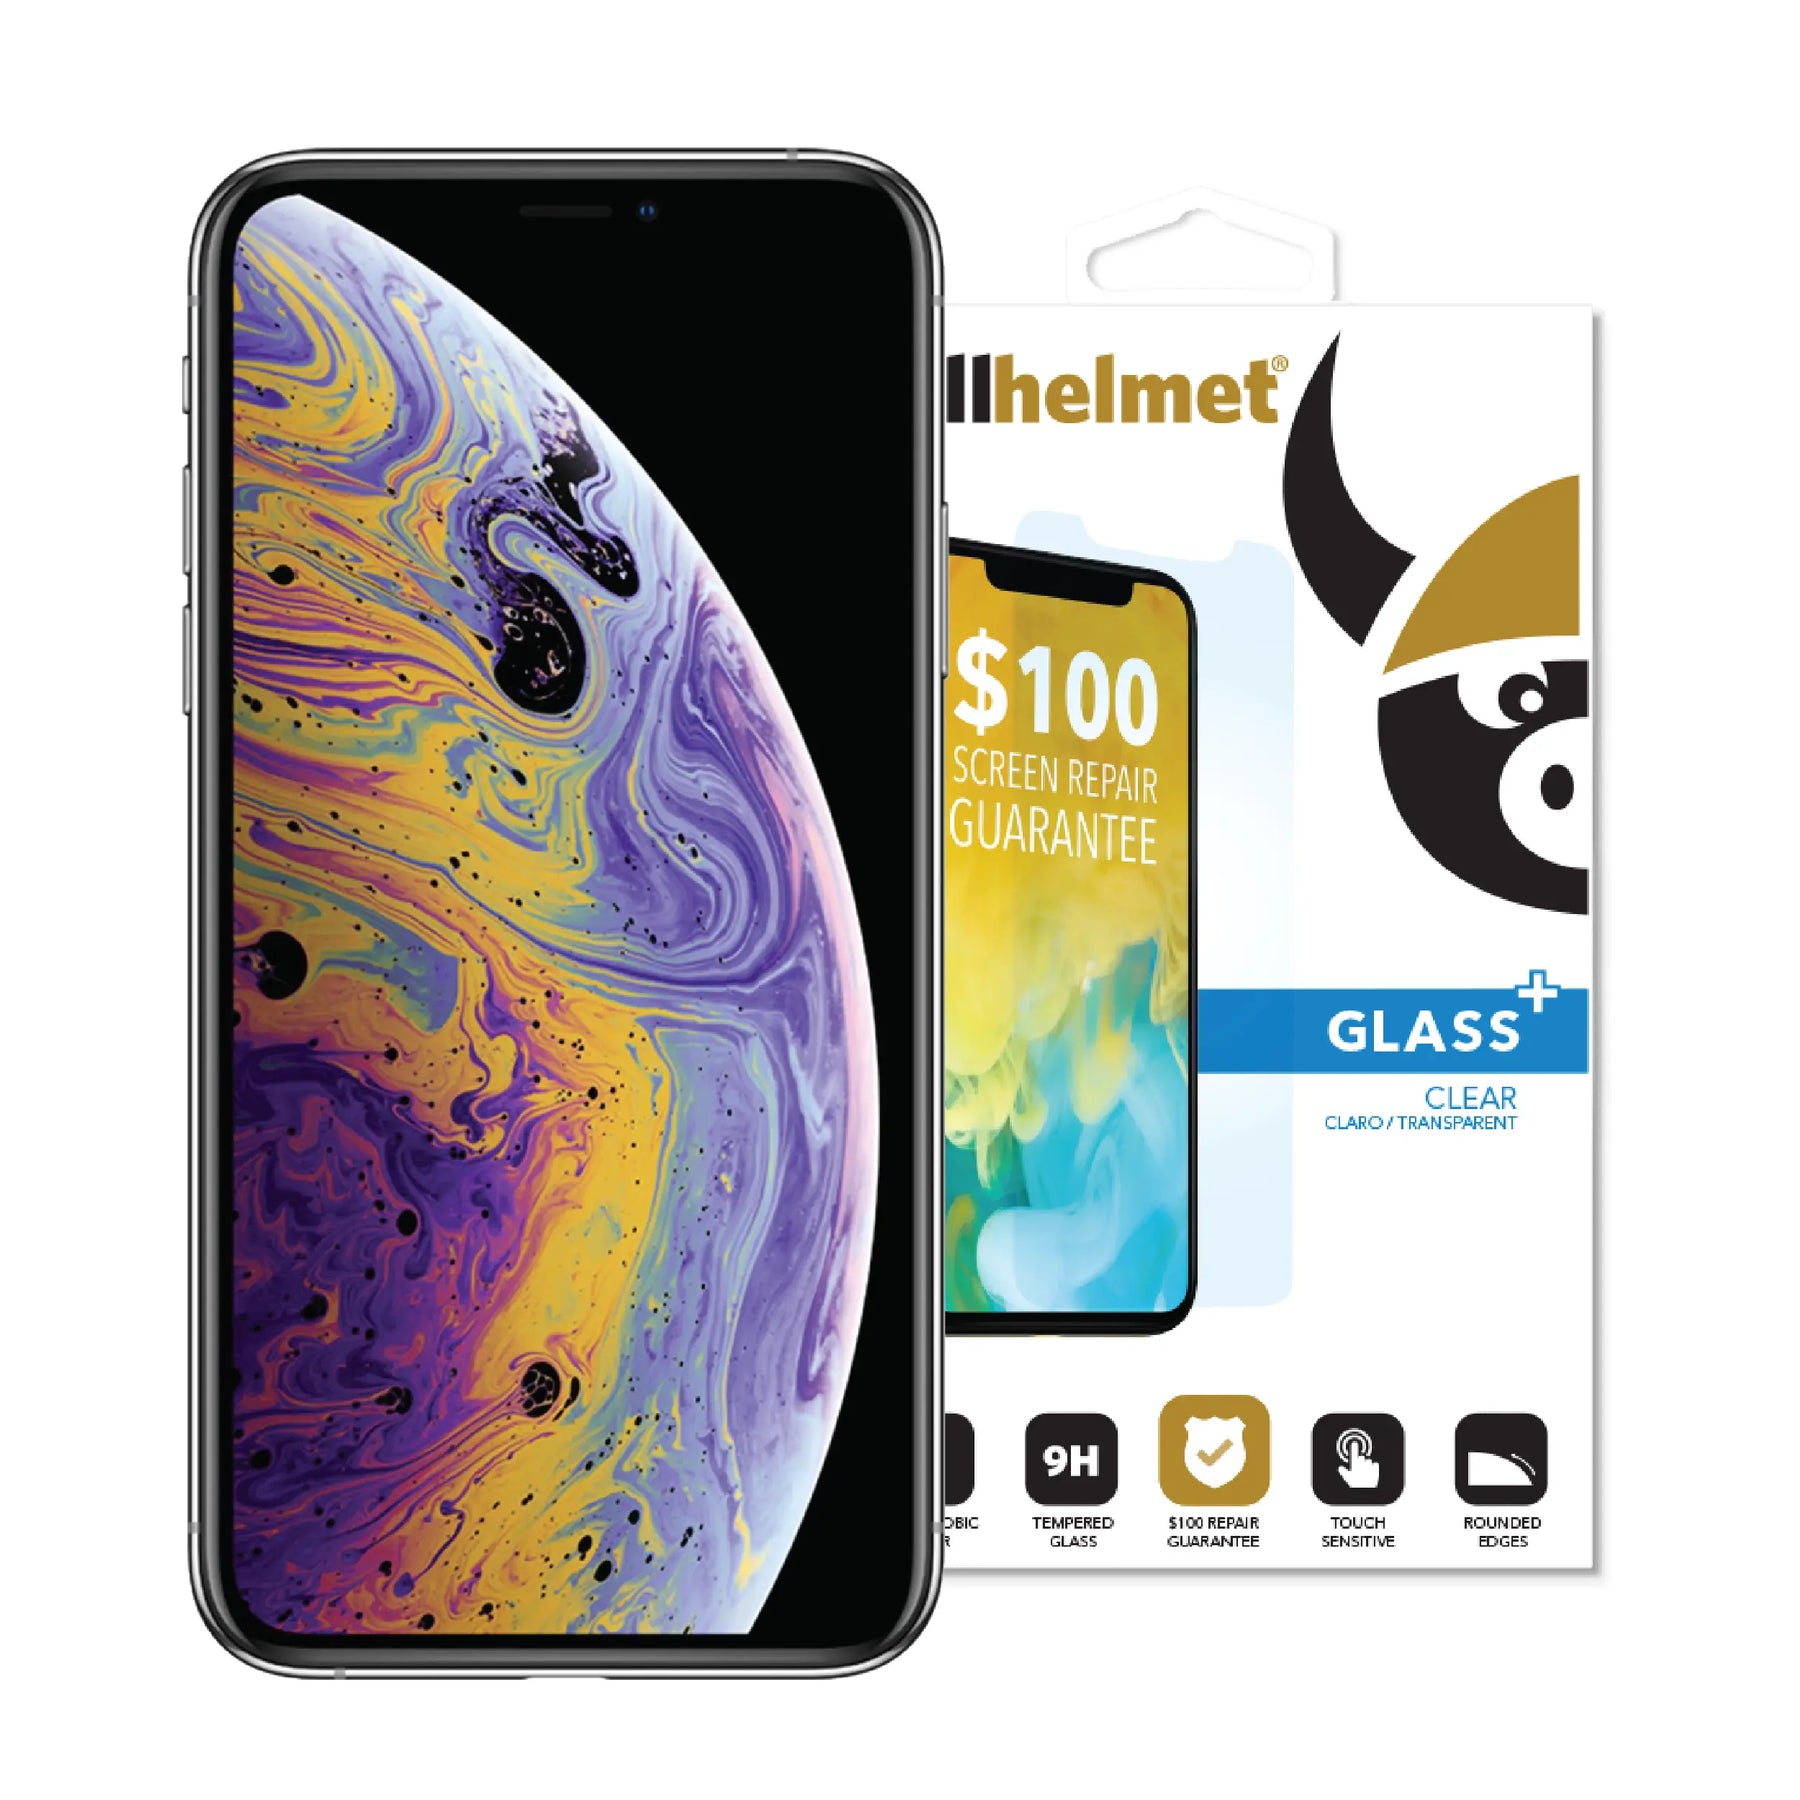 cellhelmet Tempered Glass Screen Protector for iPhone 11 Pro with Insurance